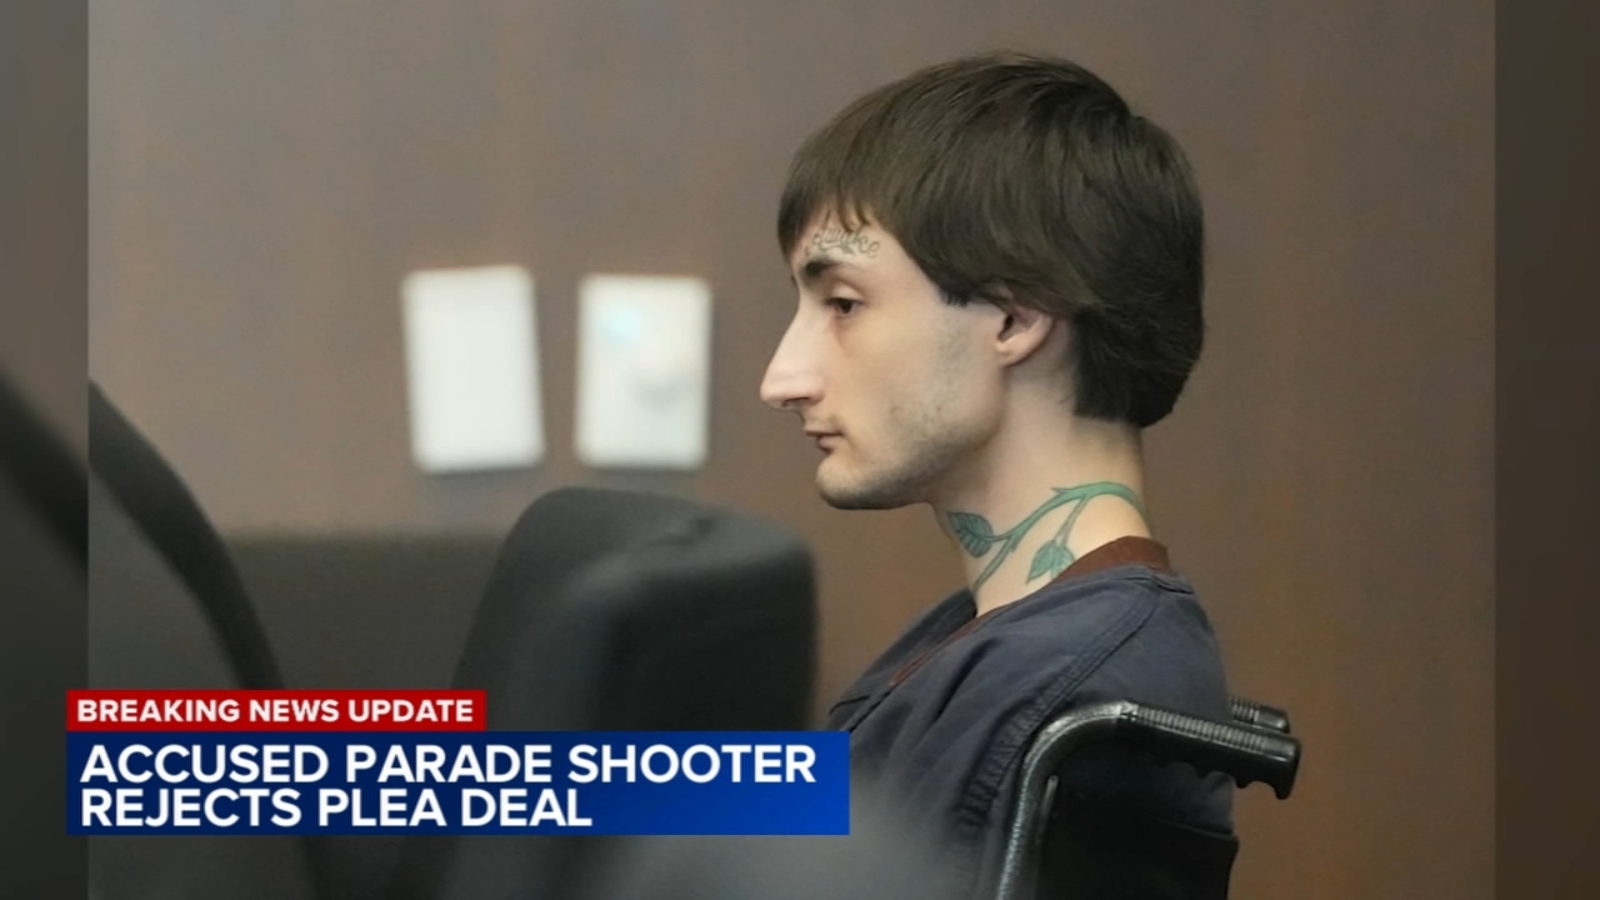 Highland Park, Illinois July 4th parade shooting suspect Robert Crimo III rejects plea deal at hearing [Video]